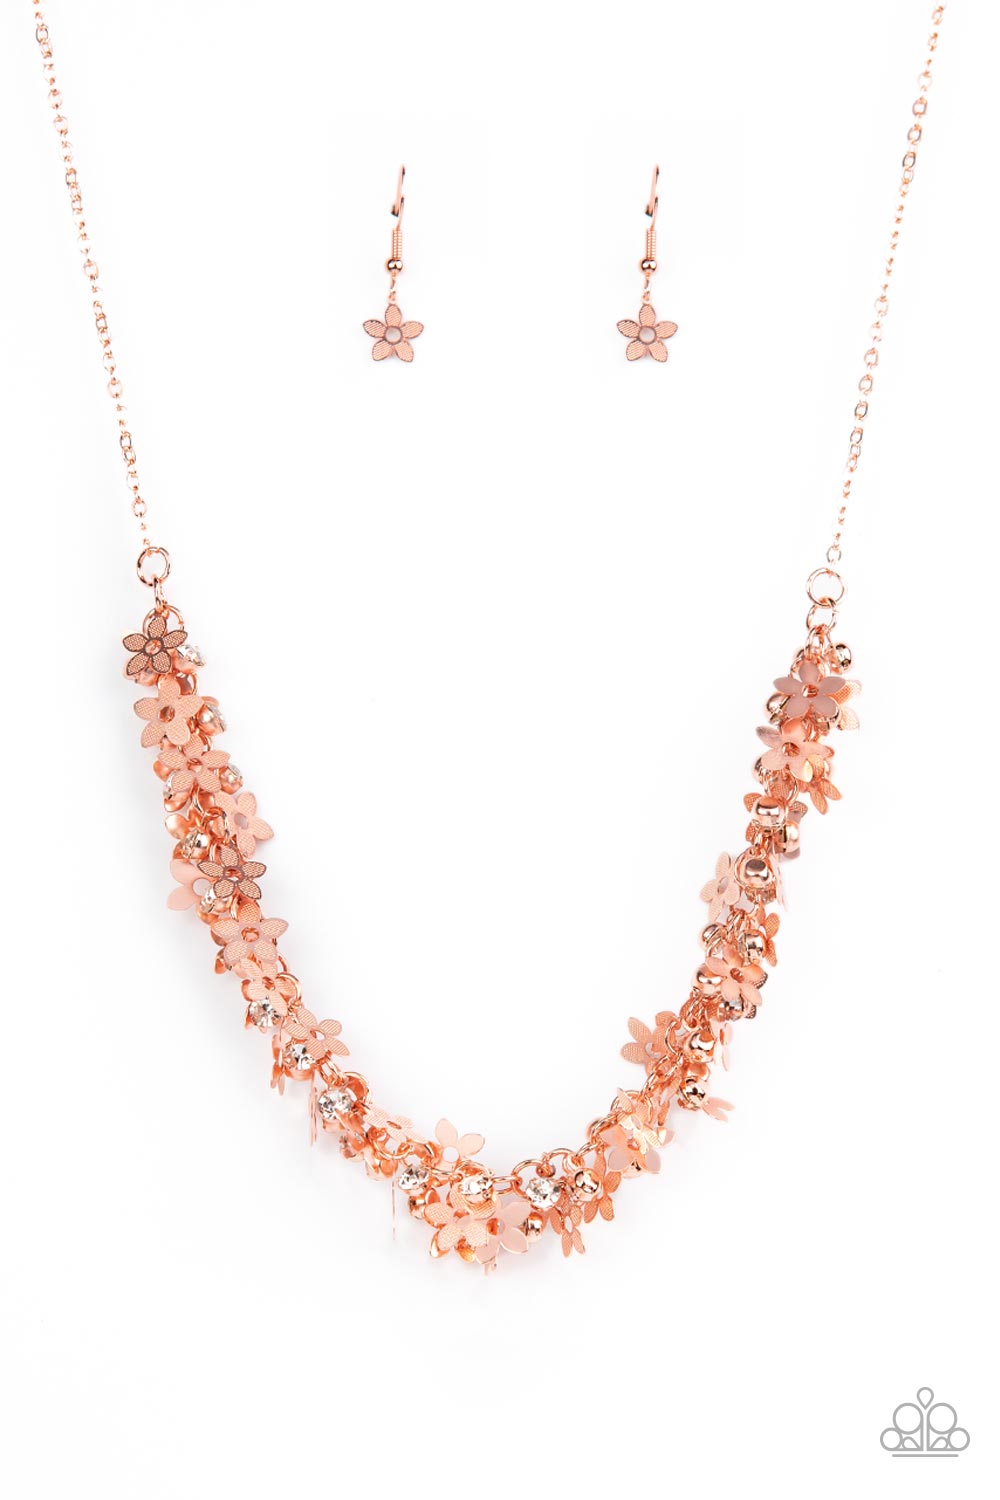 Fearlessly Floral - copper - Paparazzi necklace